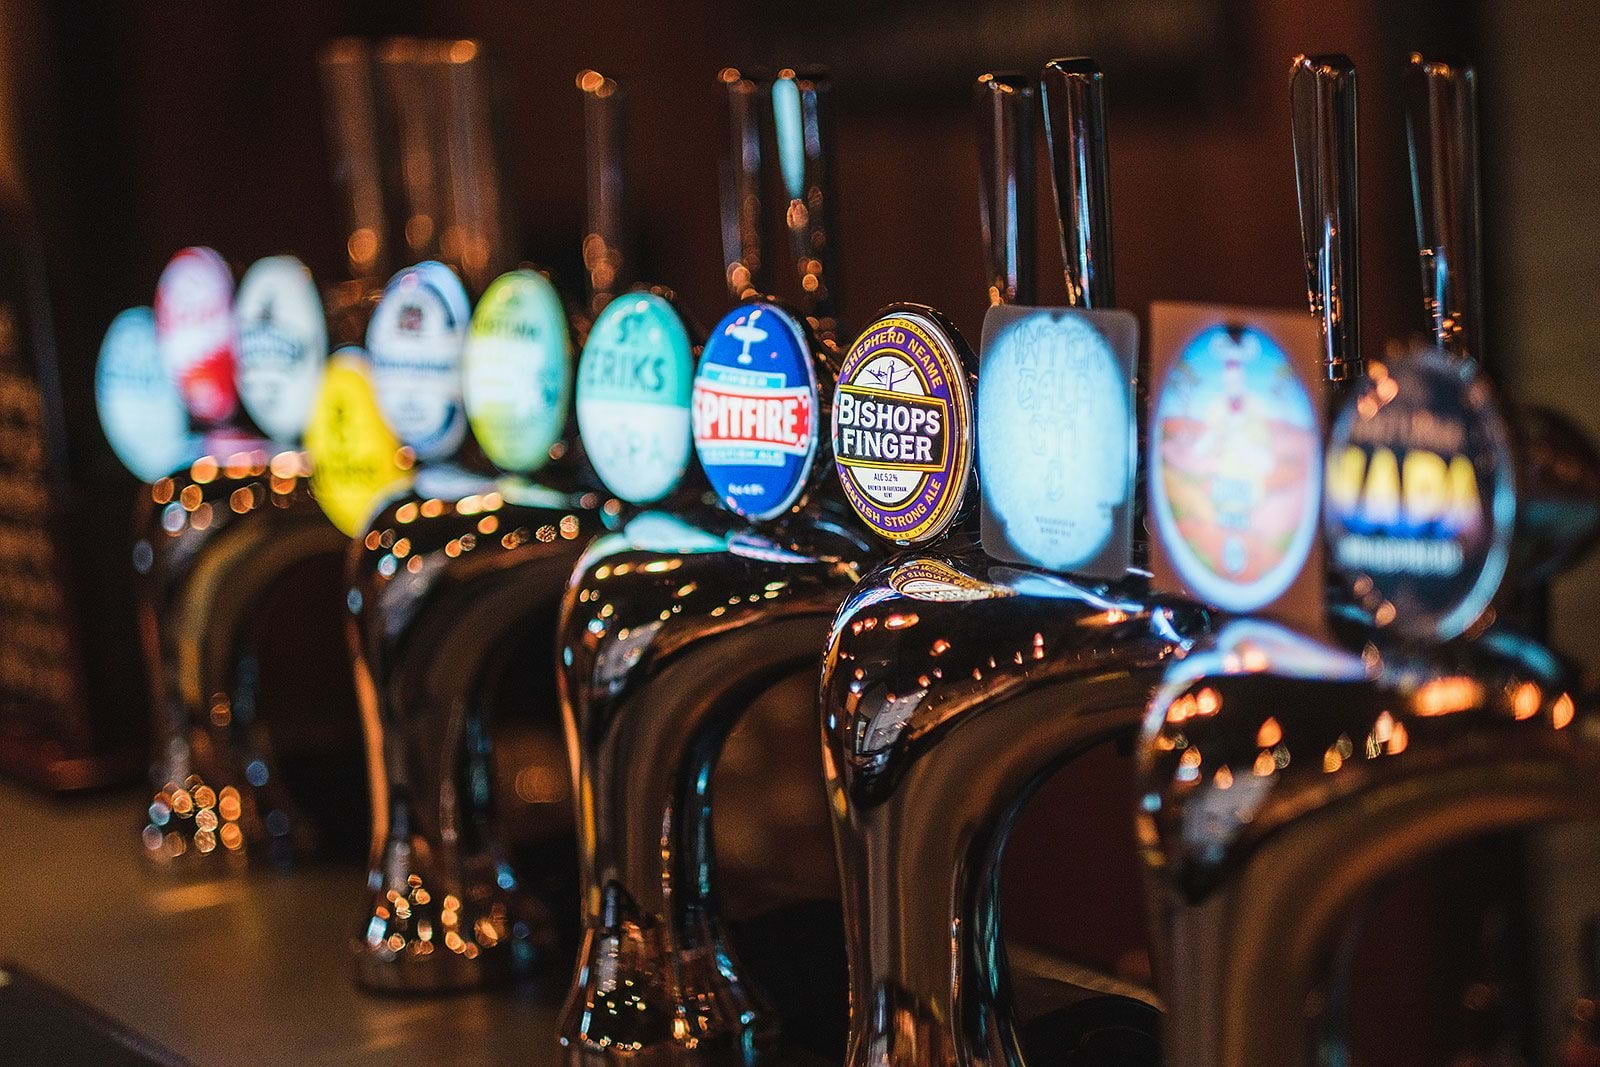 Beer taps in a pub